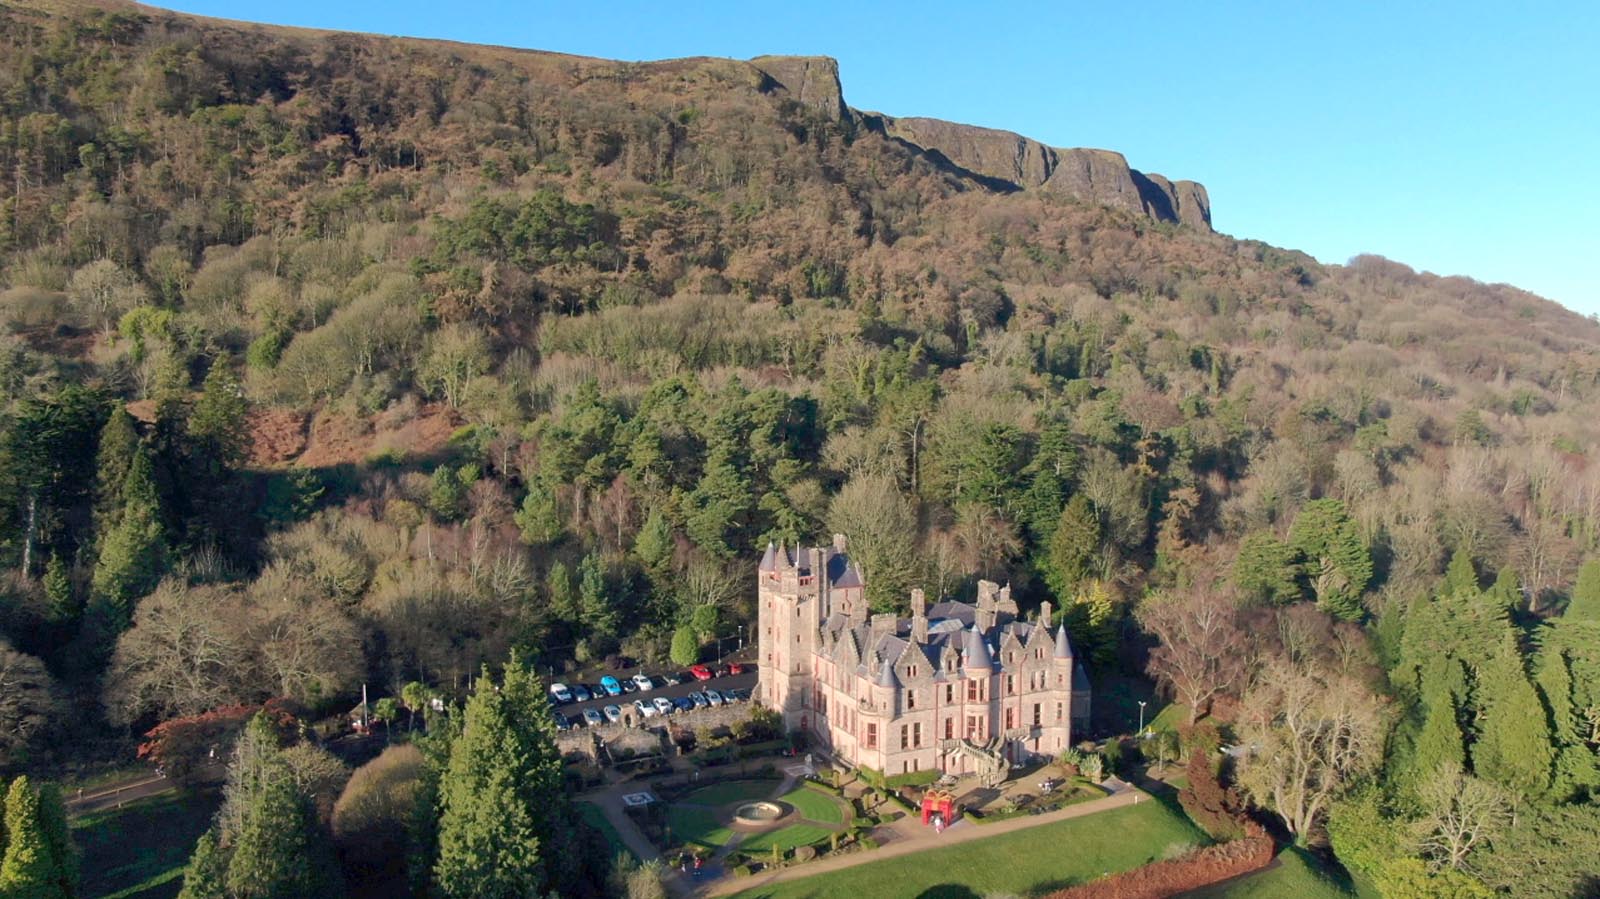 Aerial drone photography and video production services Dublin and Ireland portfolio - screenshot 6 of Belfast Castle 2 video